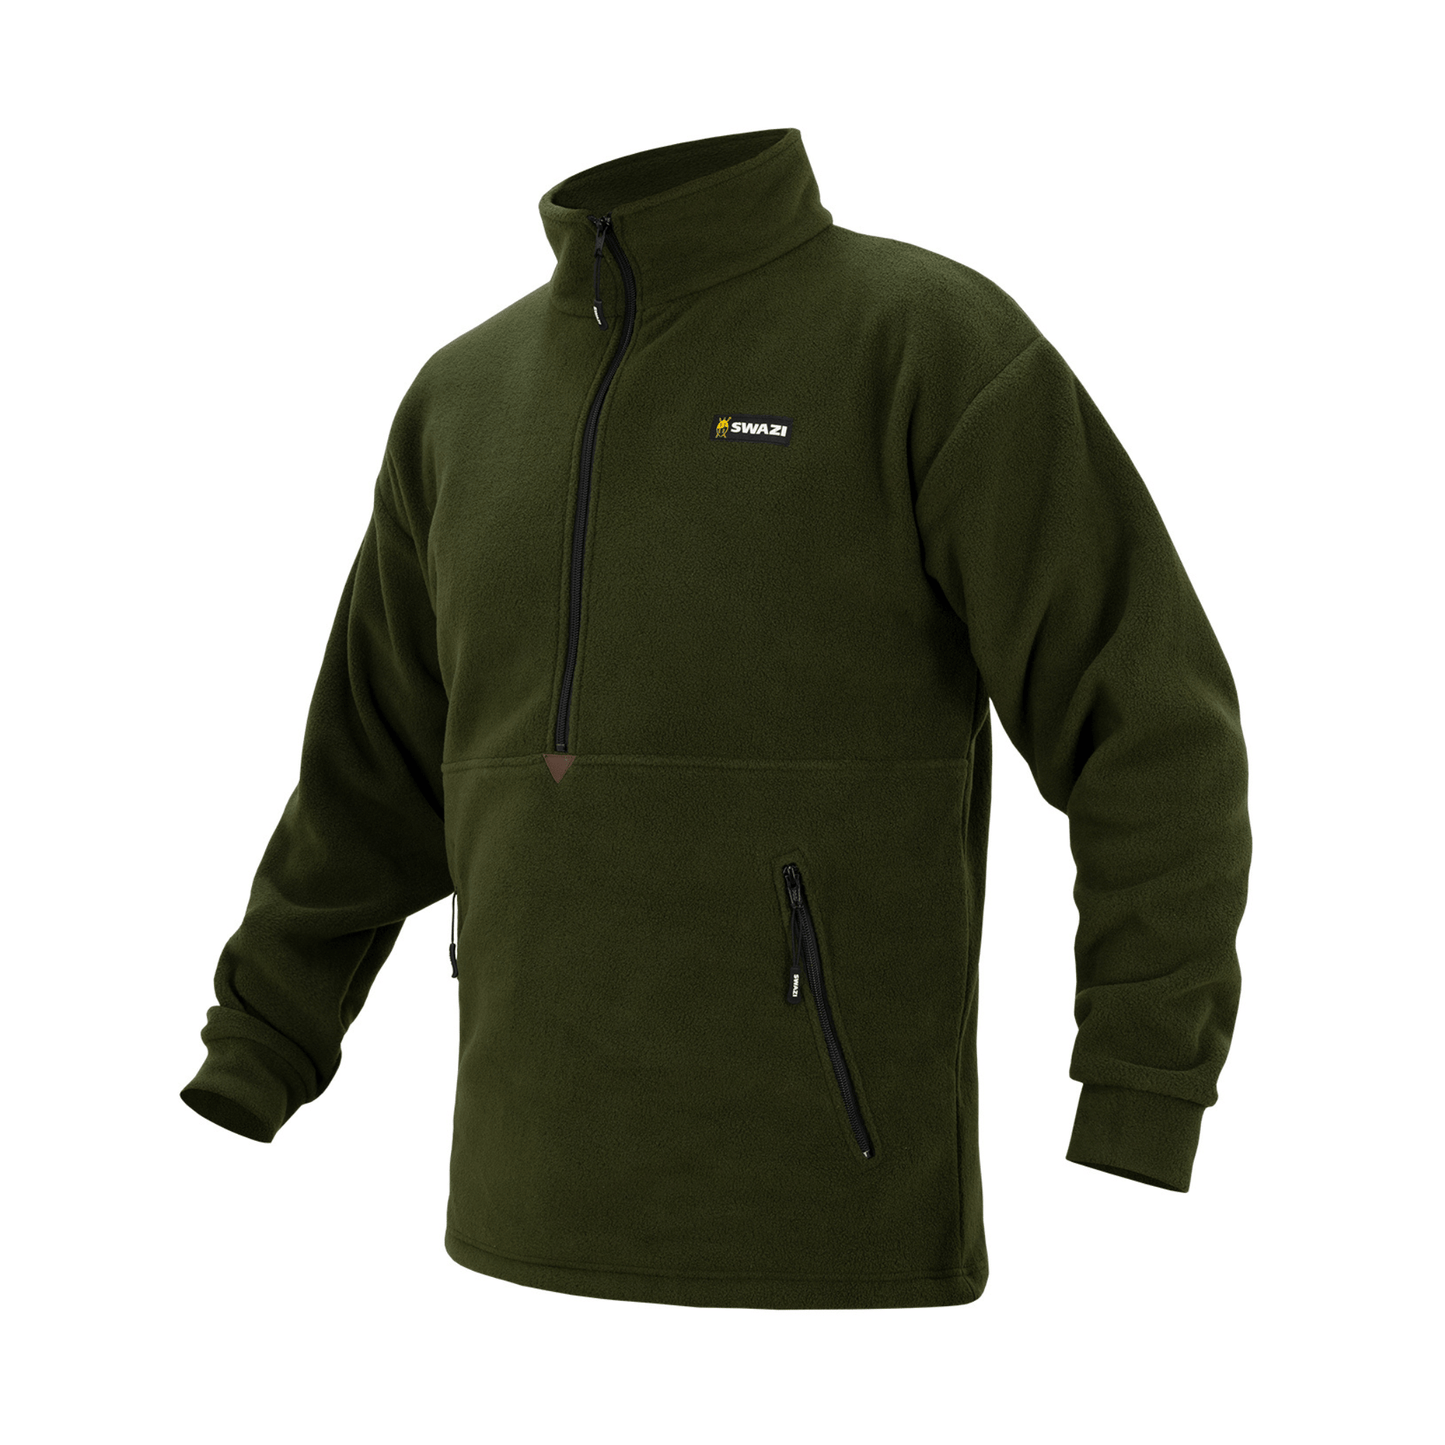 Swazi Doughroaster in Olive, part of the Swazi clothing range available in the UK.